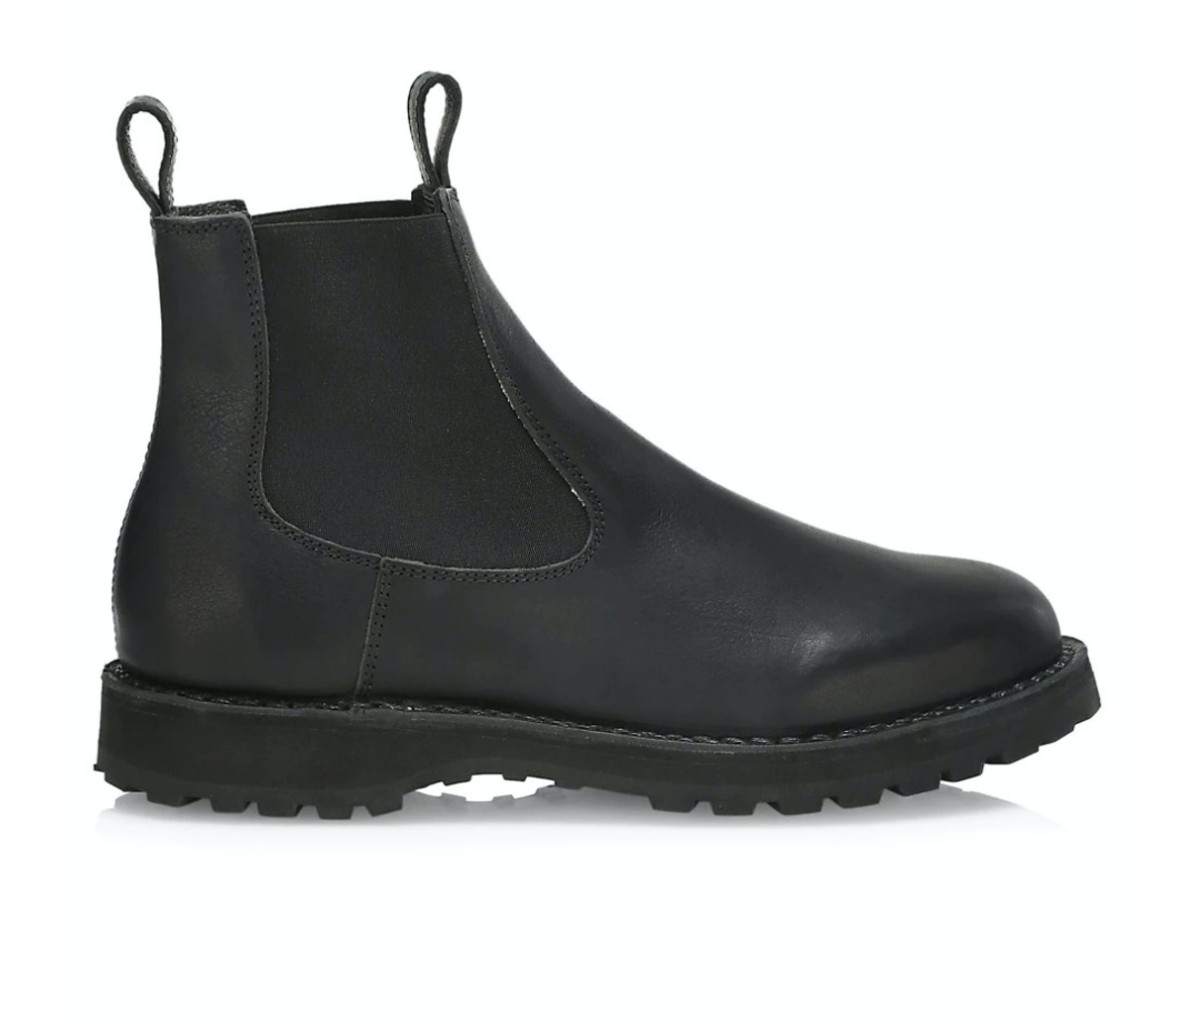 Men's Boots Guide: Our Favorite Pairs for 2022 | Men's Journal - Men's ...